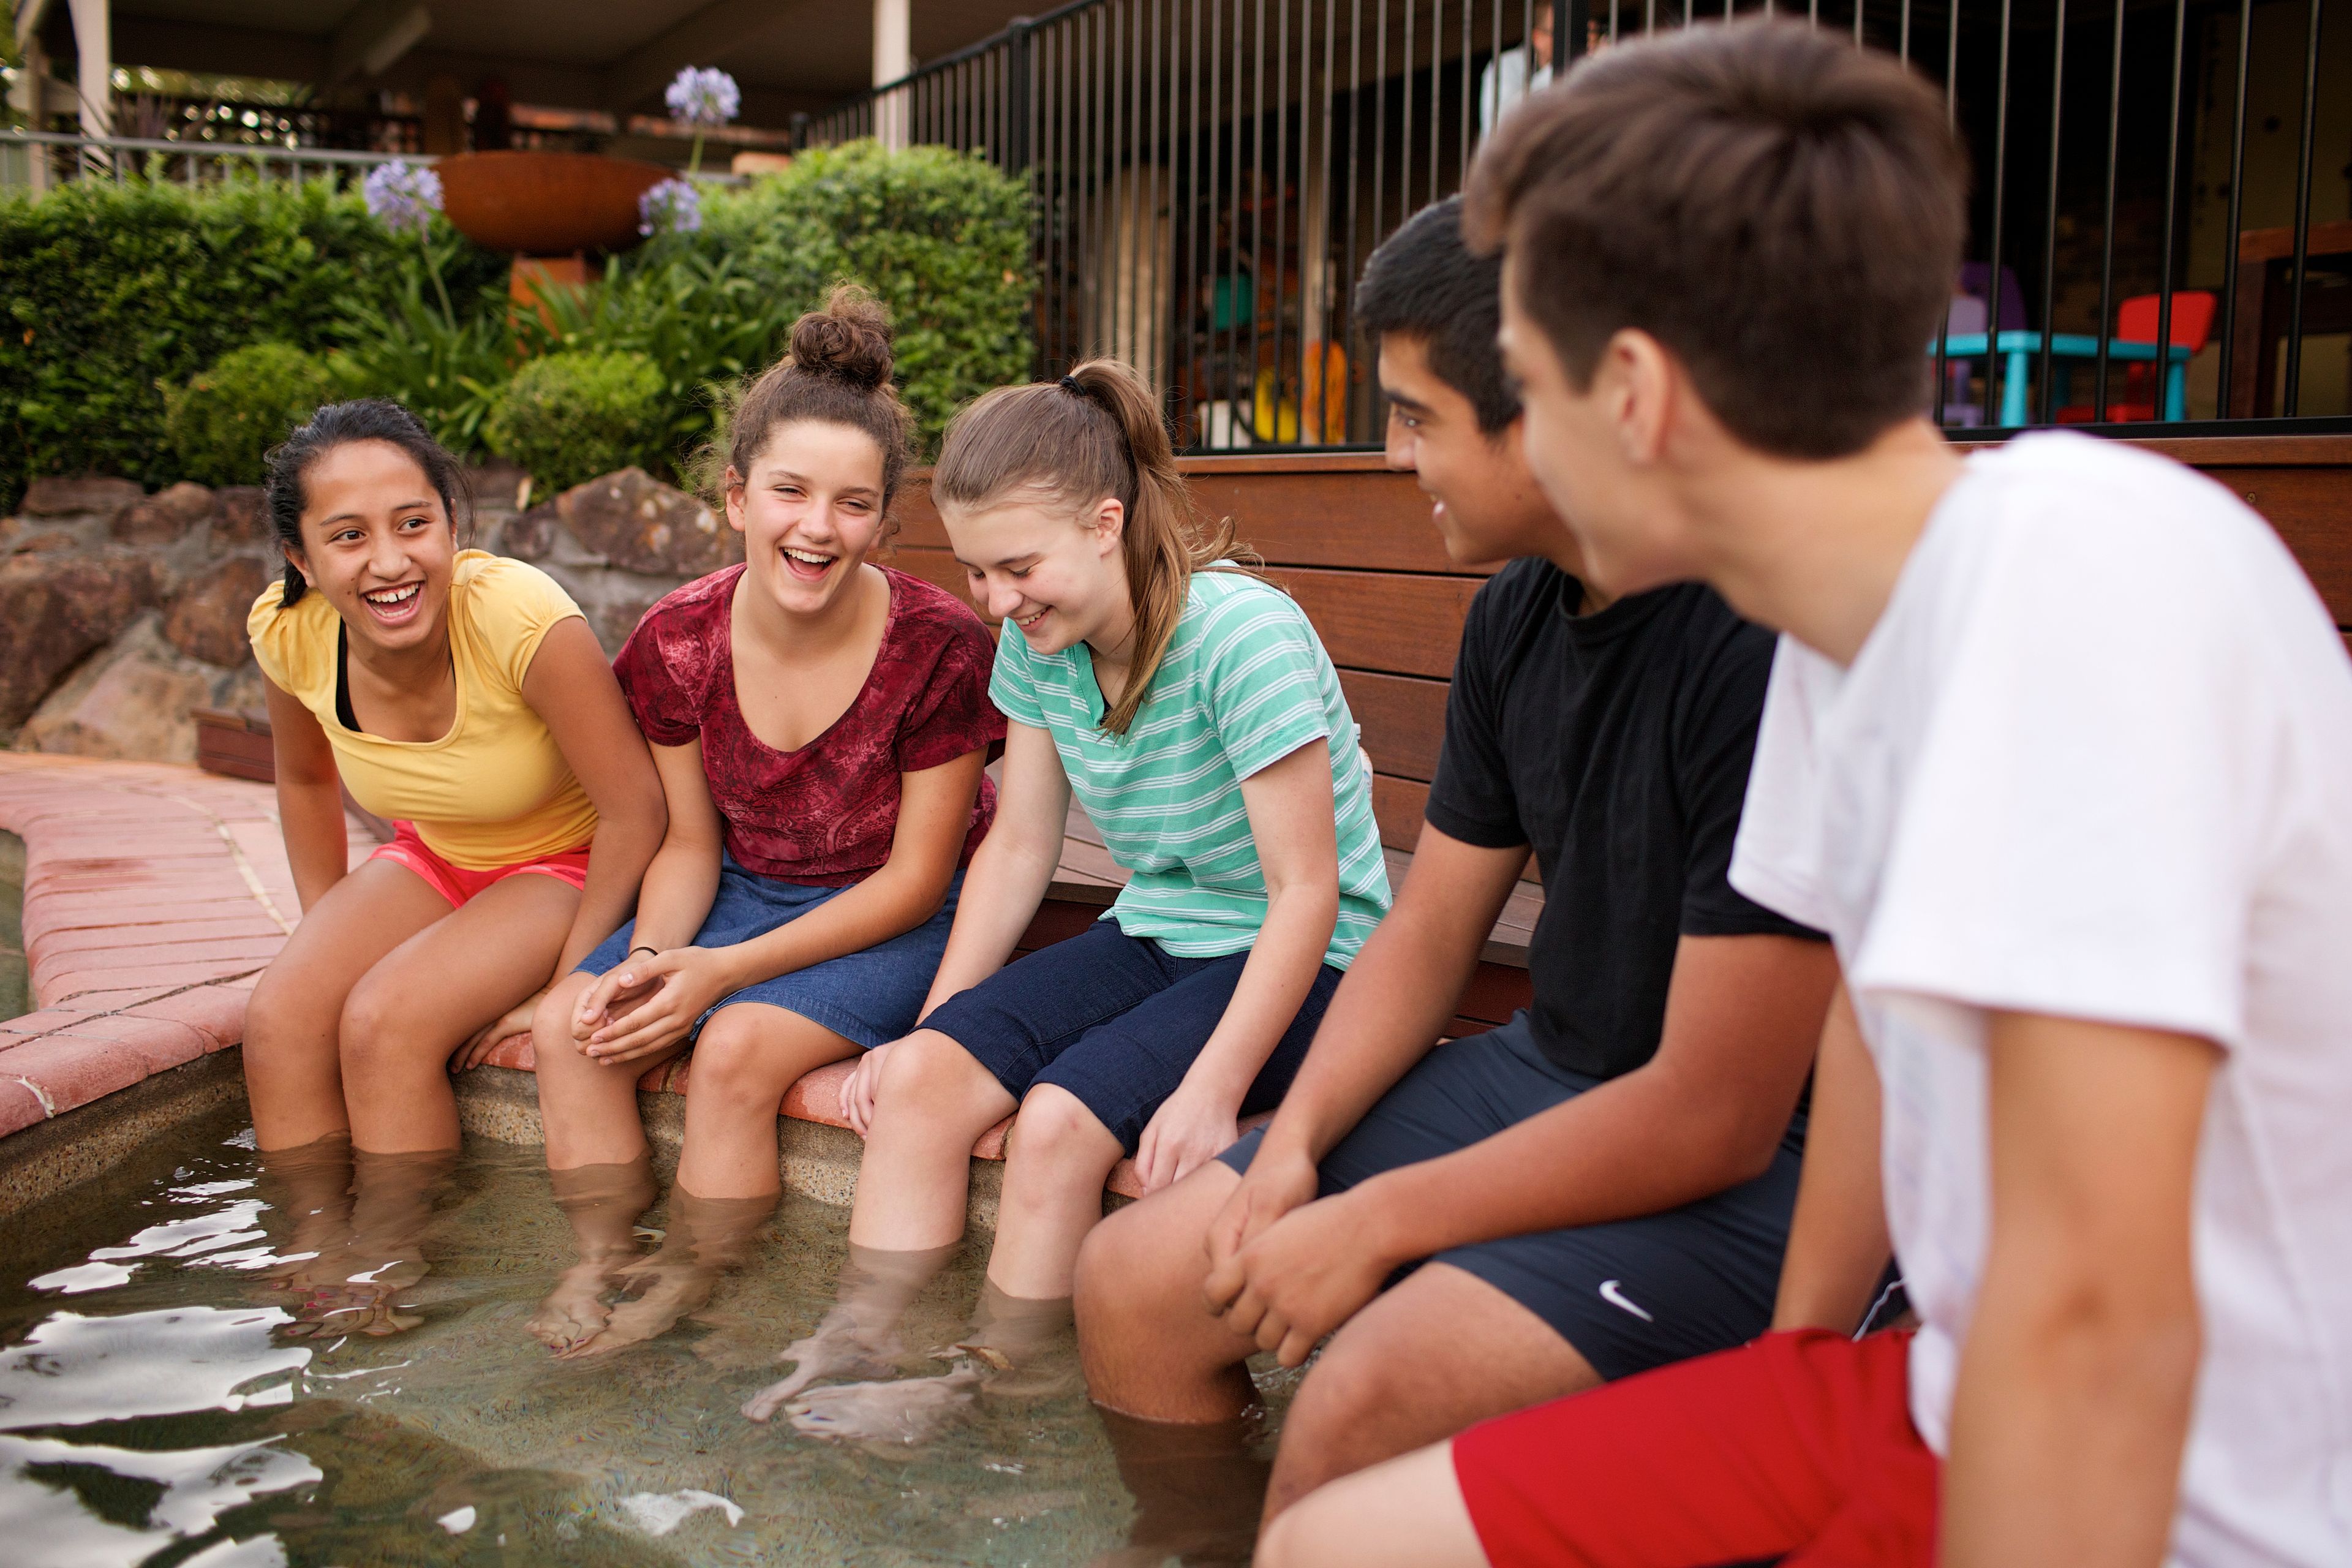 A group of youth hanging out together on the edge of a pool, with only their feet dangling in the water.  